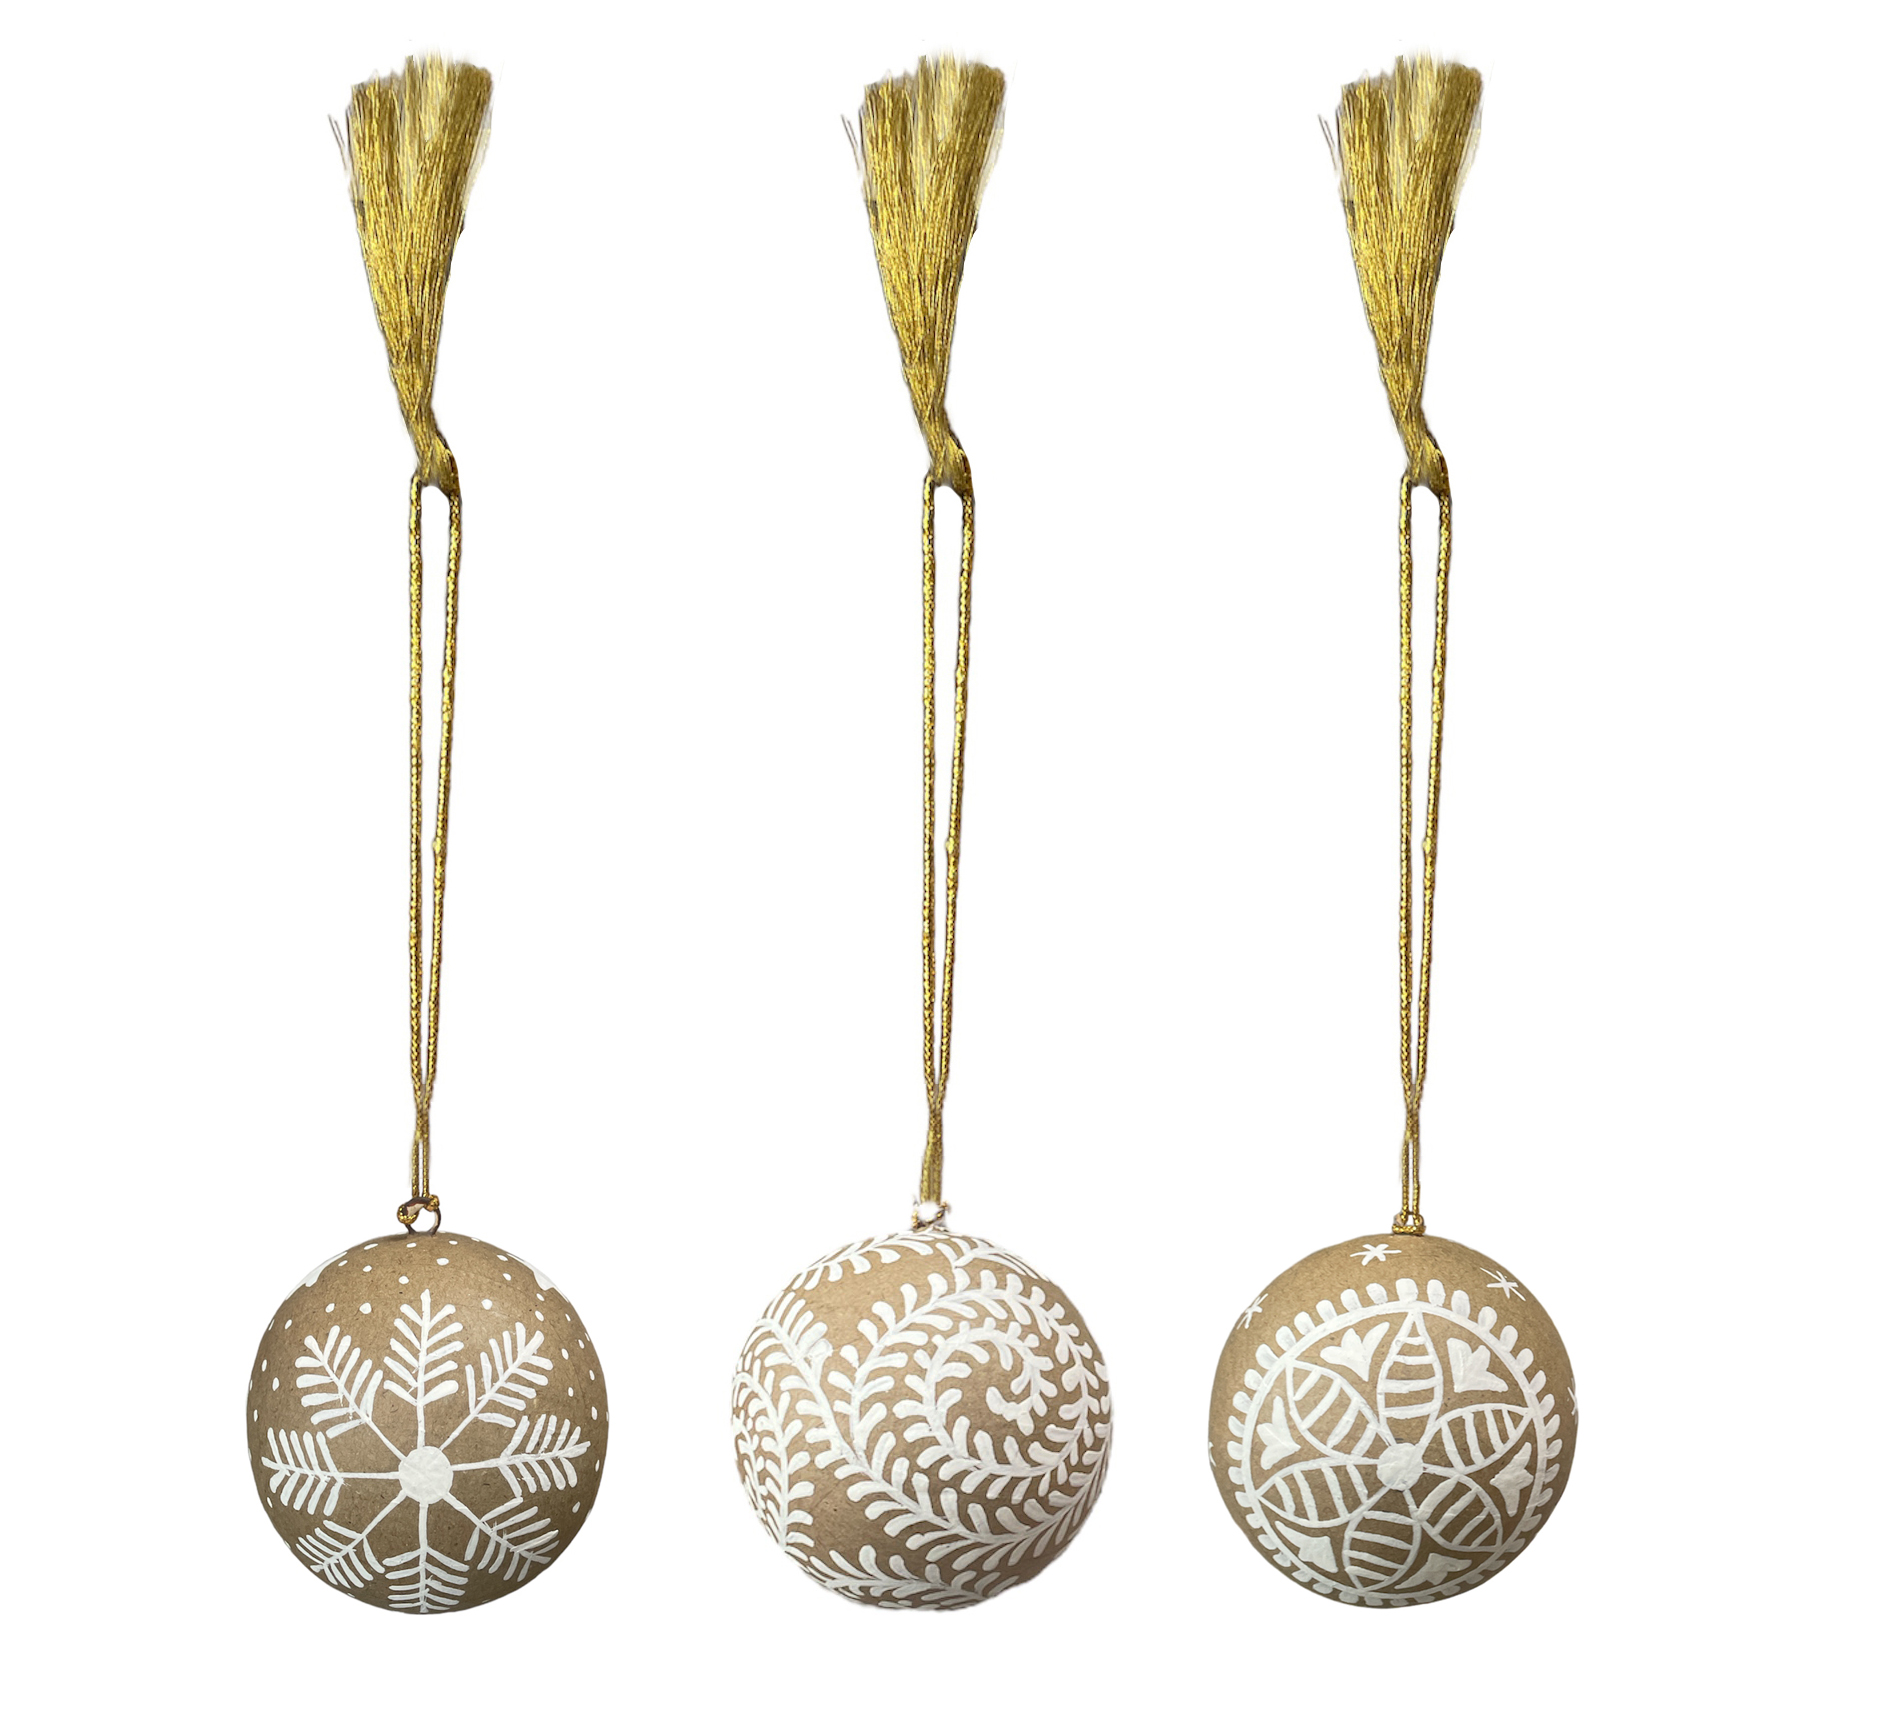 Kraft And White Baubles Set 3 Assorted Designs 7.5cm Gift